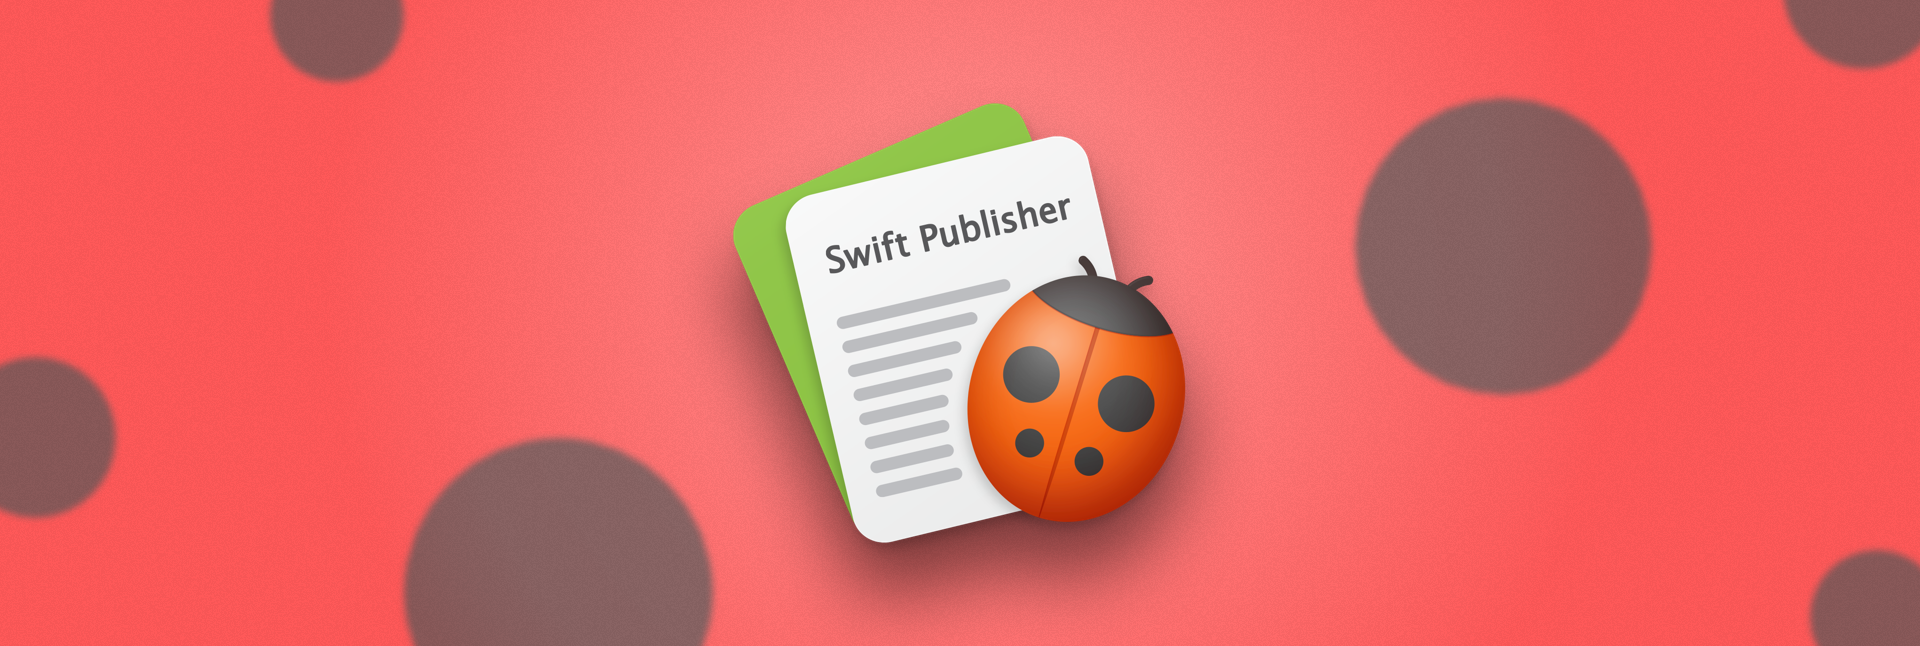 mac equivalent to publisher